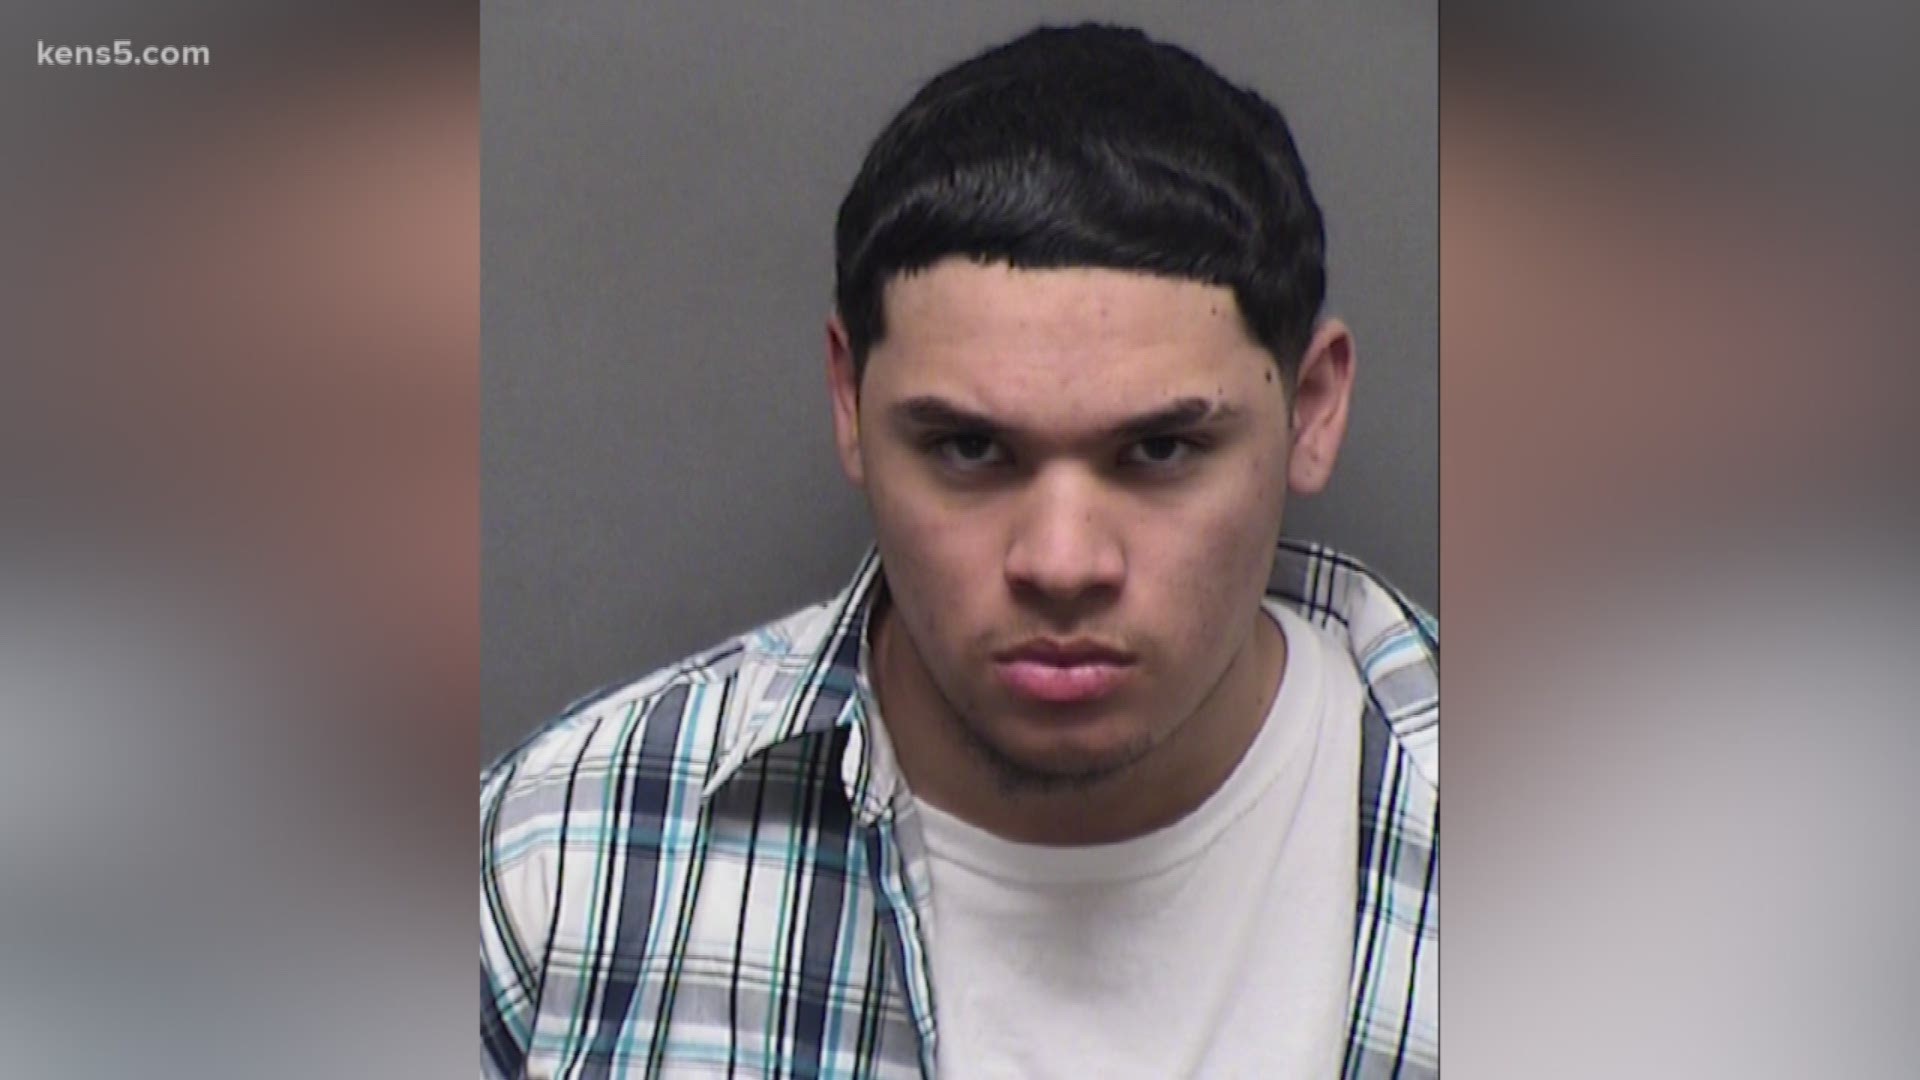 A 17-year-old is charged with aggravated robbery after a victim showed San Antonio Police officers his car, which ended up with eight bullet holes during an attack.